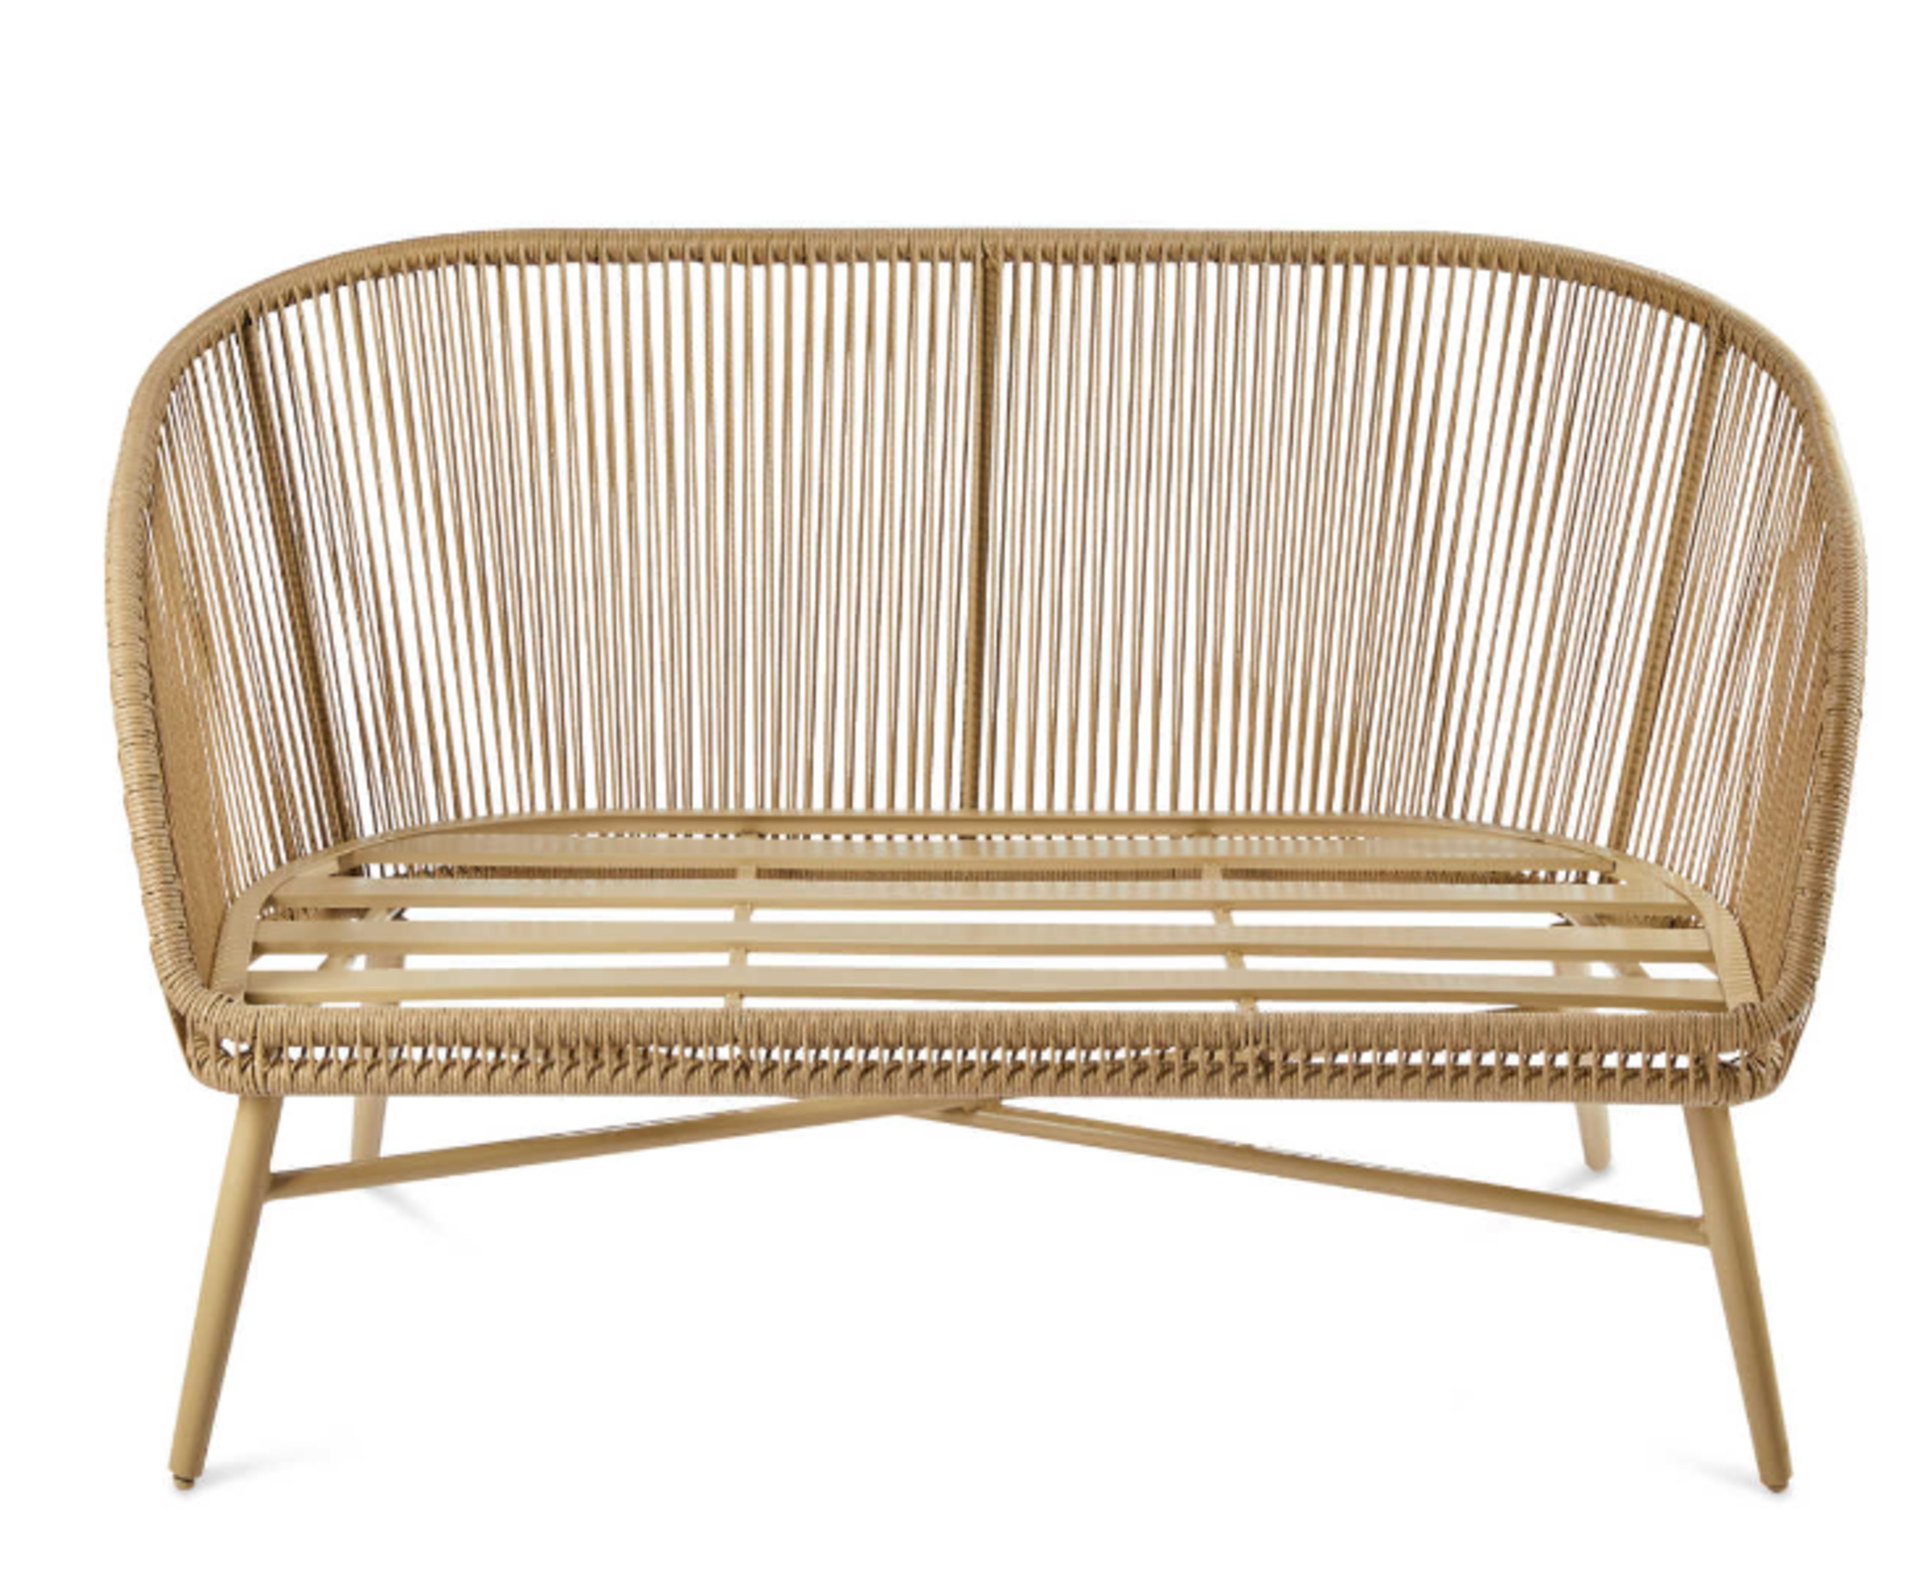 Rope Effect Furniture Set. Enjoy those lazy days in the garden with this comfortable and stylish - Image 4 of 5